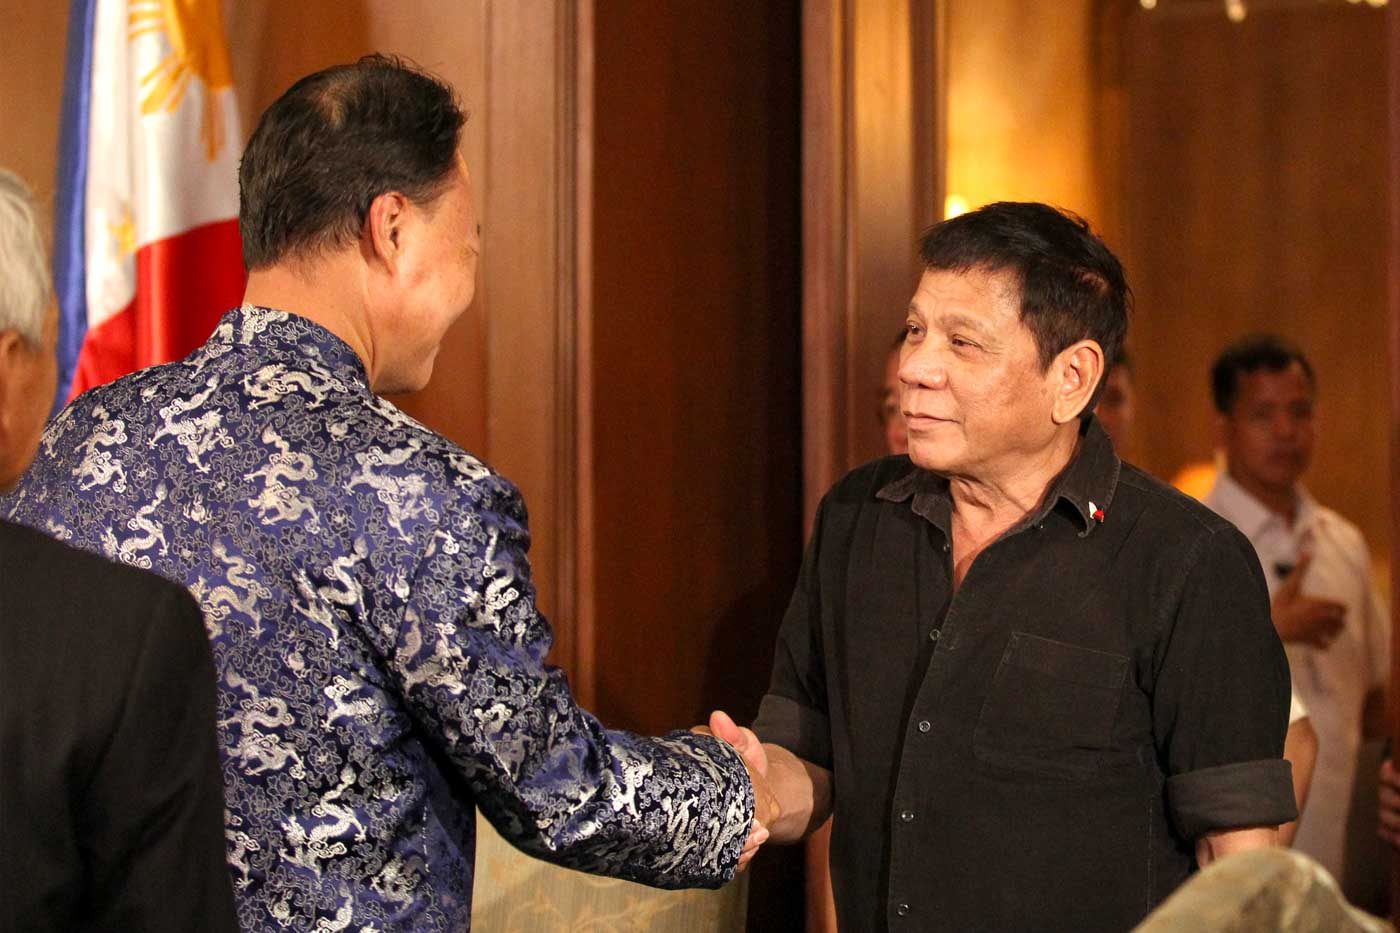 PREFERRED GET-UP. President Rodrigo Duterte wears one of his favorite tops during his meeting with Chinese Ambassador Zhao Jinhua instead of the usual barong. Photo from Malacañang Photo Bureau 